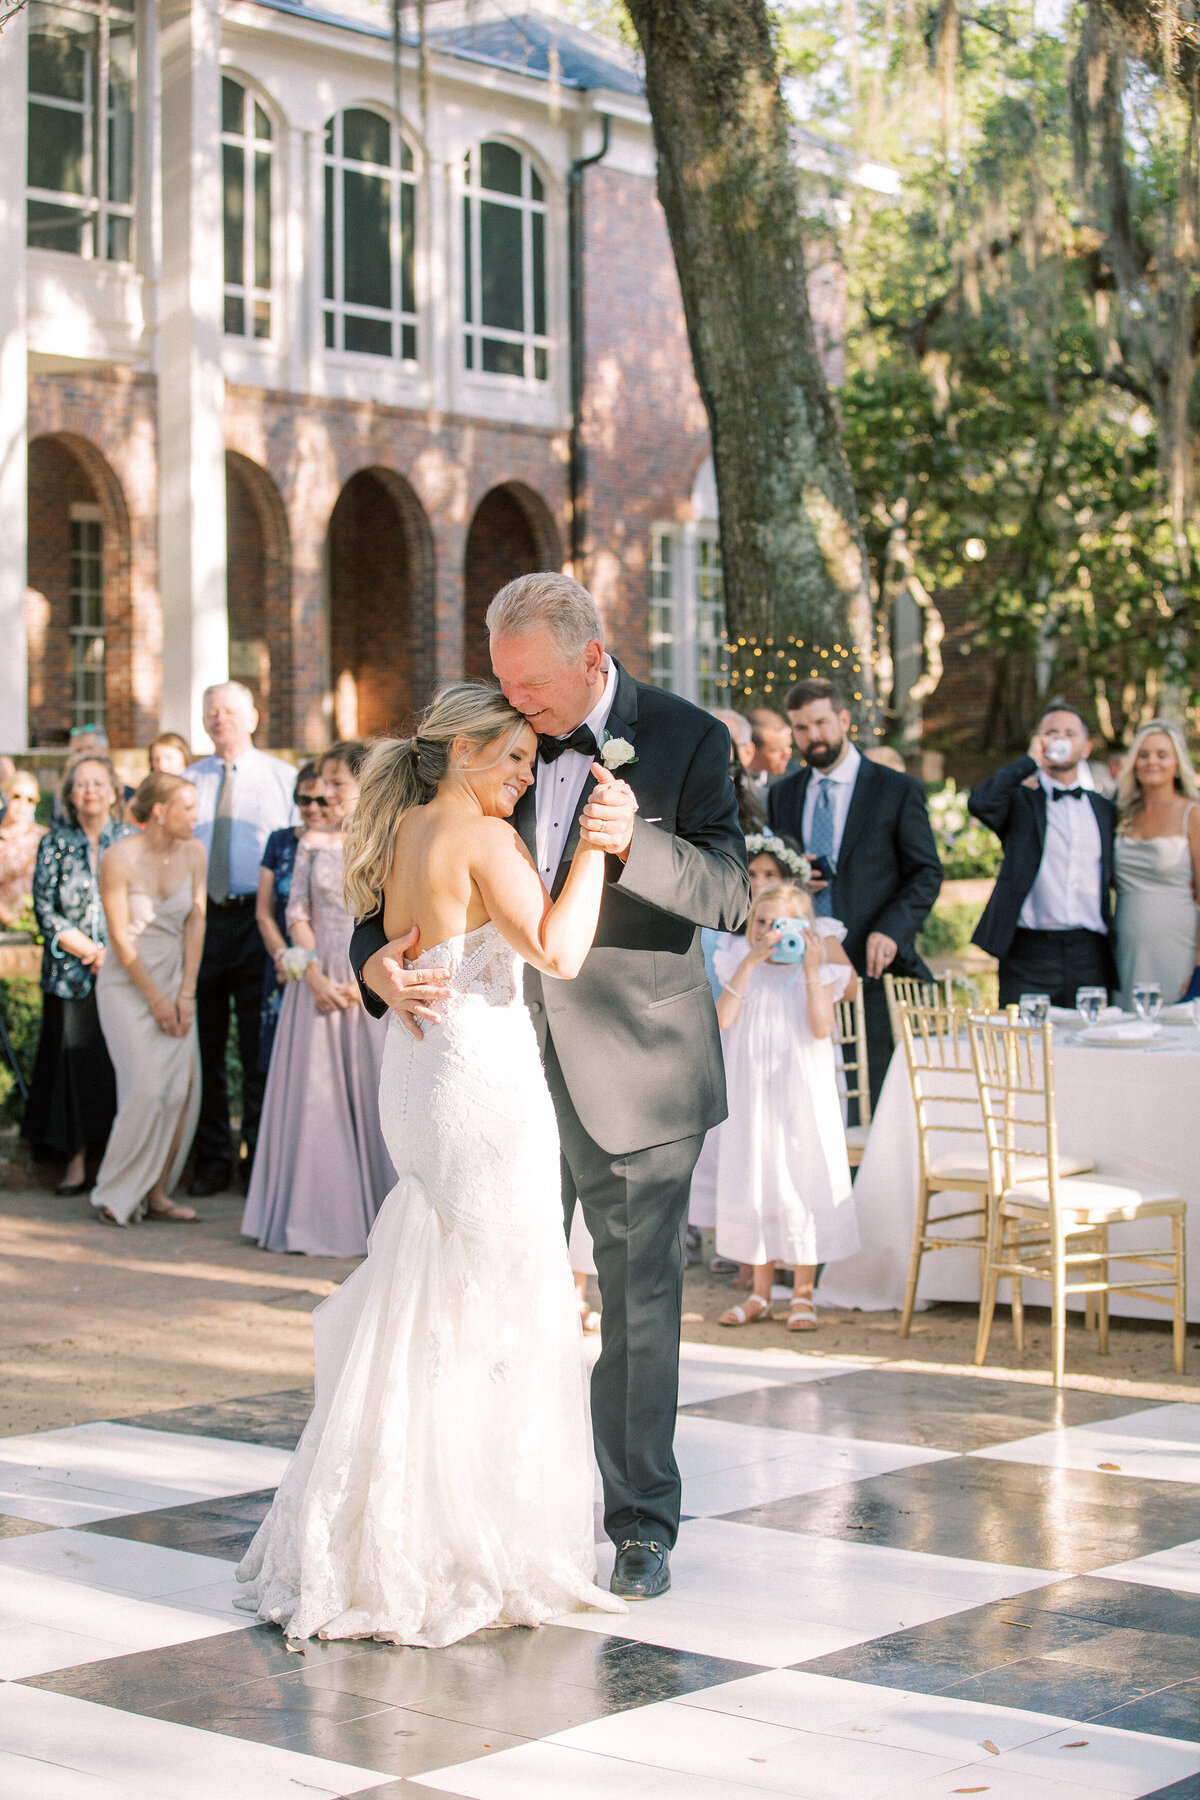 A wedding at Pebble Hill in Thomasville GA - 27